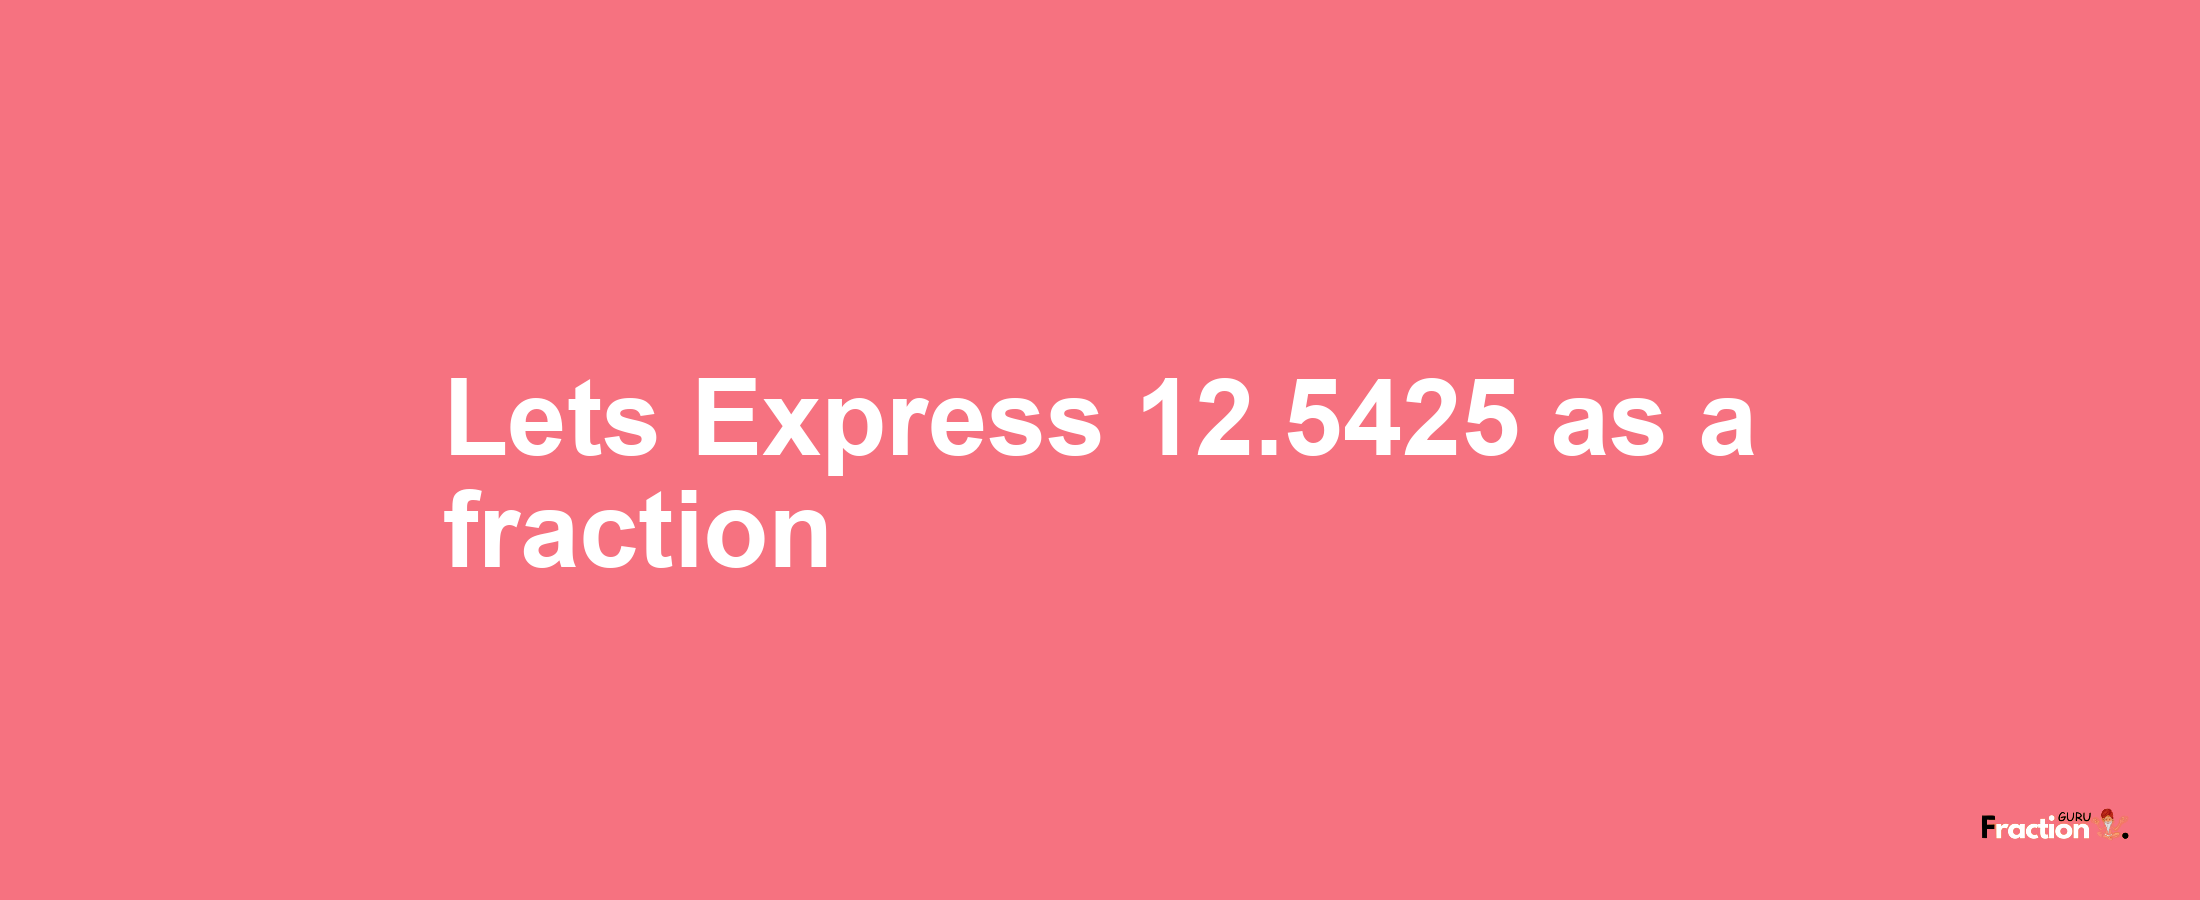 Lets Express 12.5425 as afraction